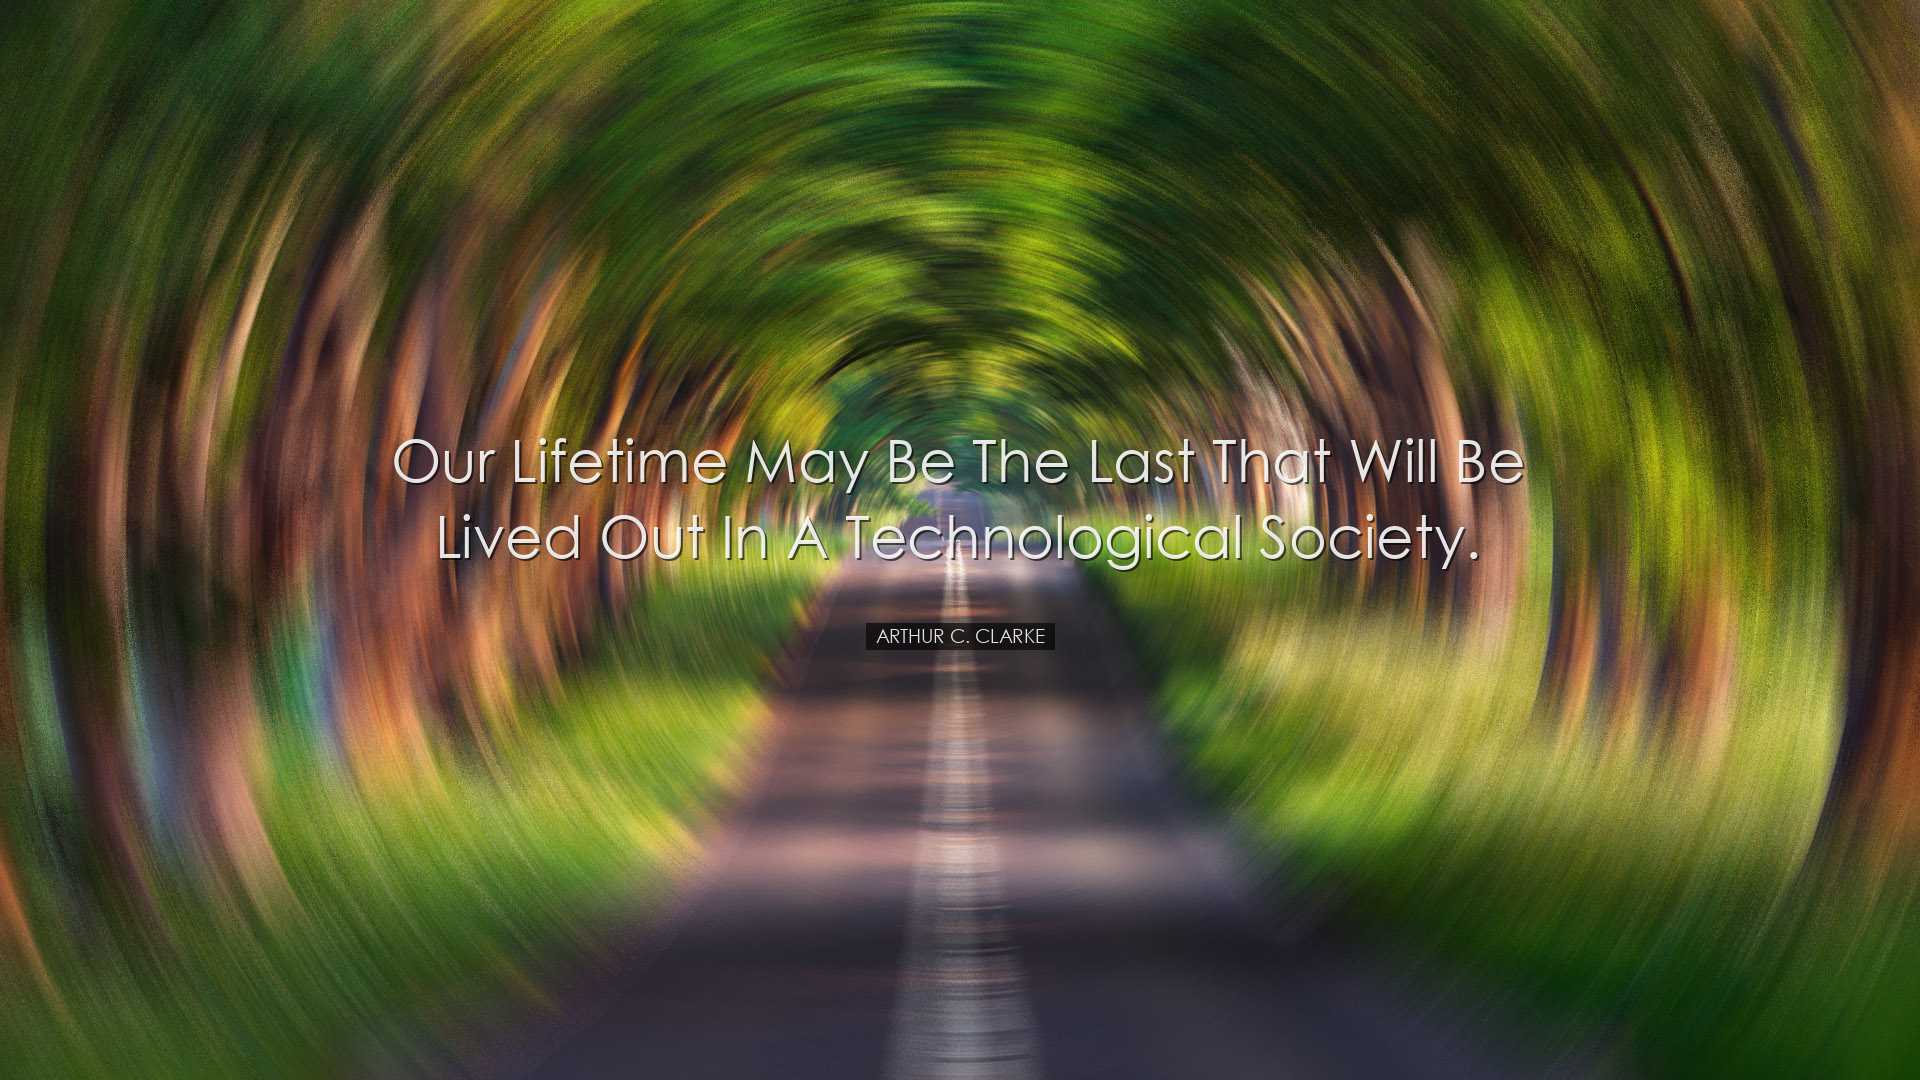 Our lifetime may be the last that will be lived out in a technolog